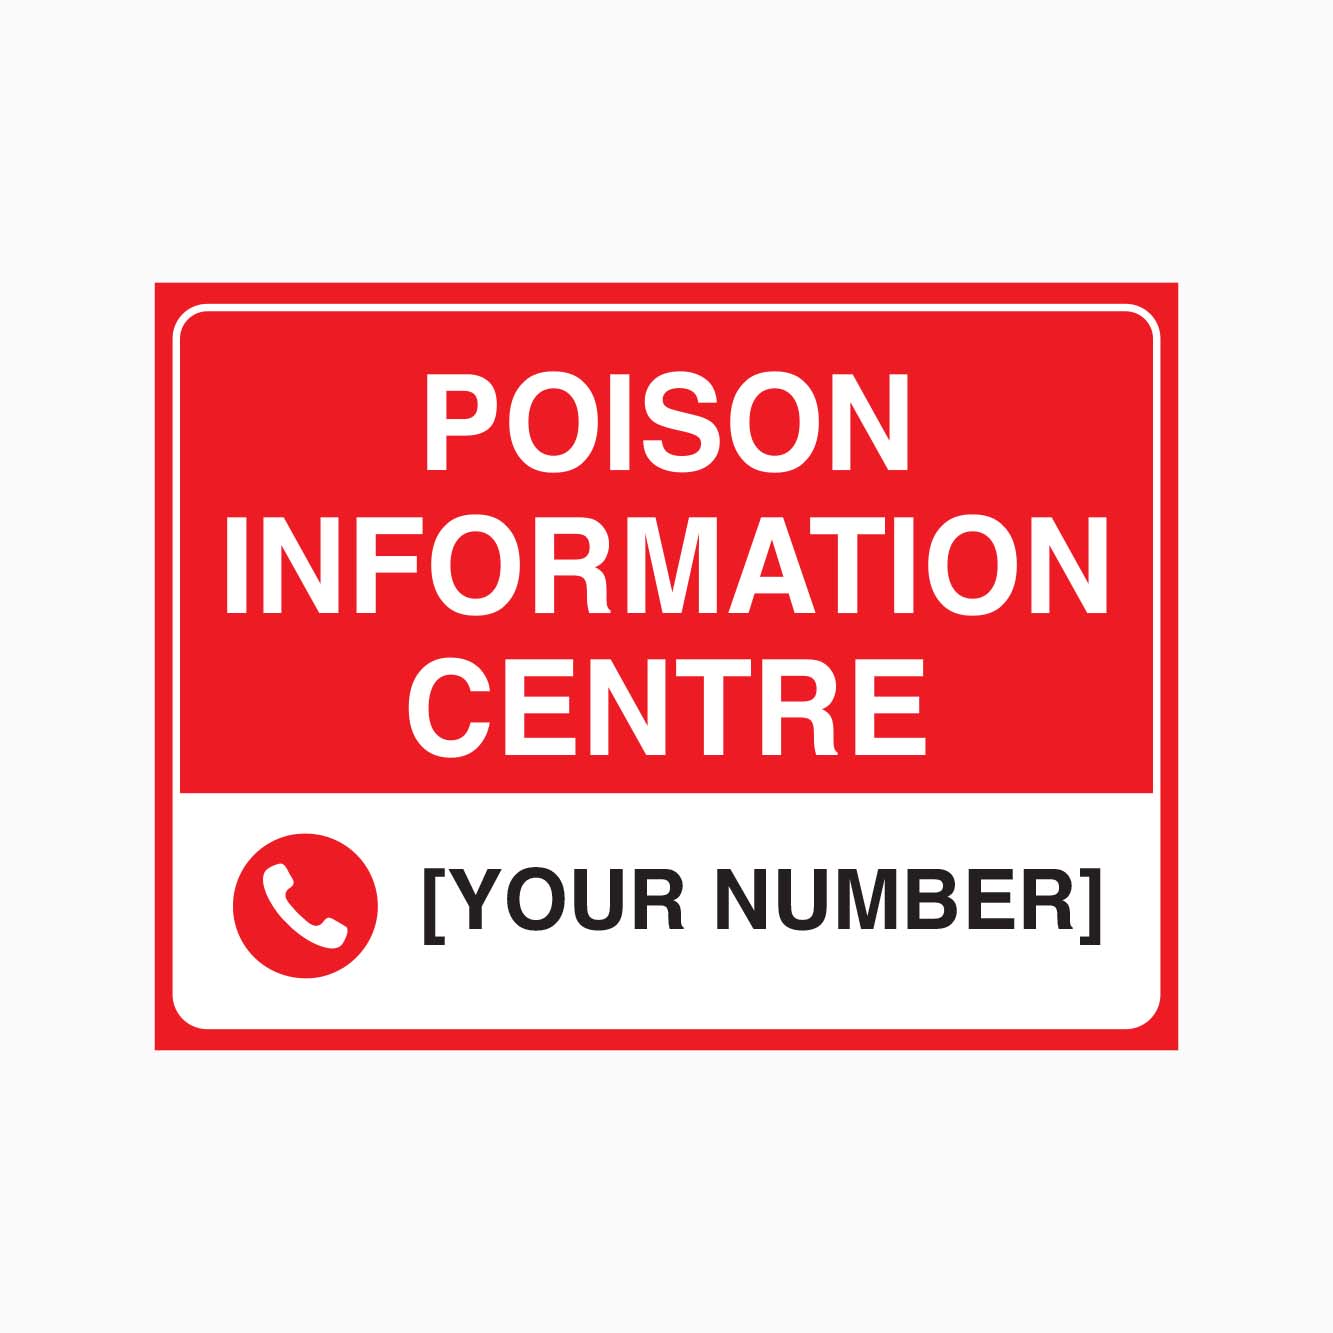 POISON INFORMATION CENTRE WITH YOUR PHONE NUMBER SIGN AT GET SIGNS IN AUSTRALIA